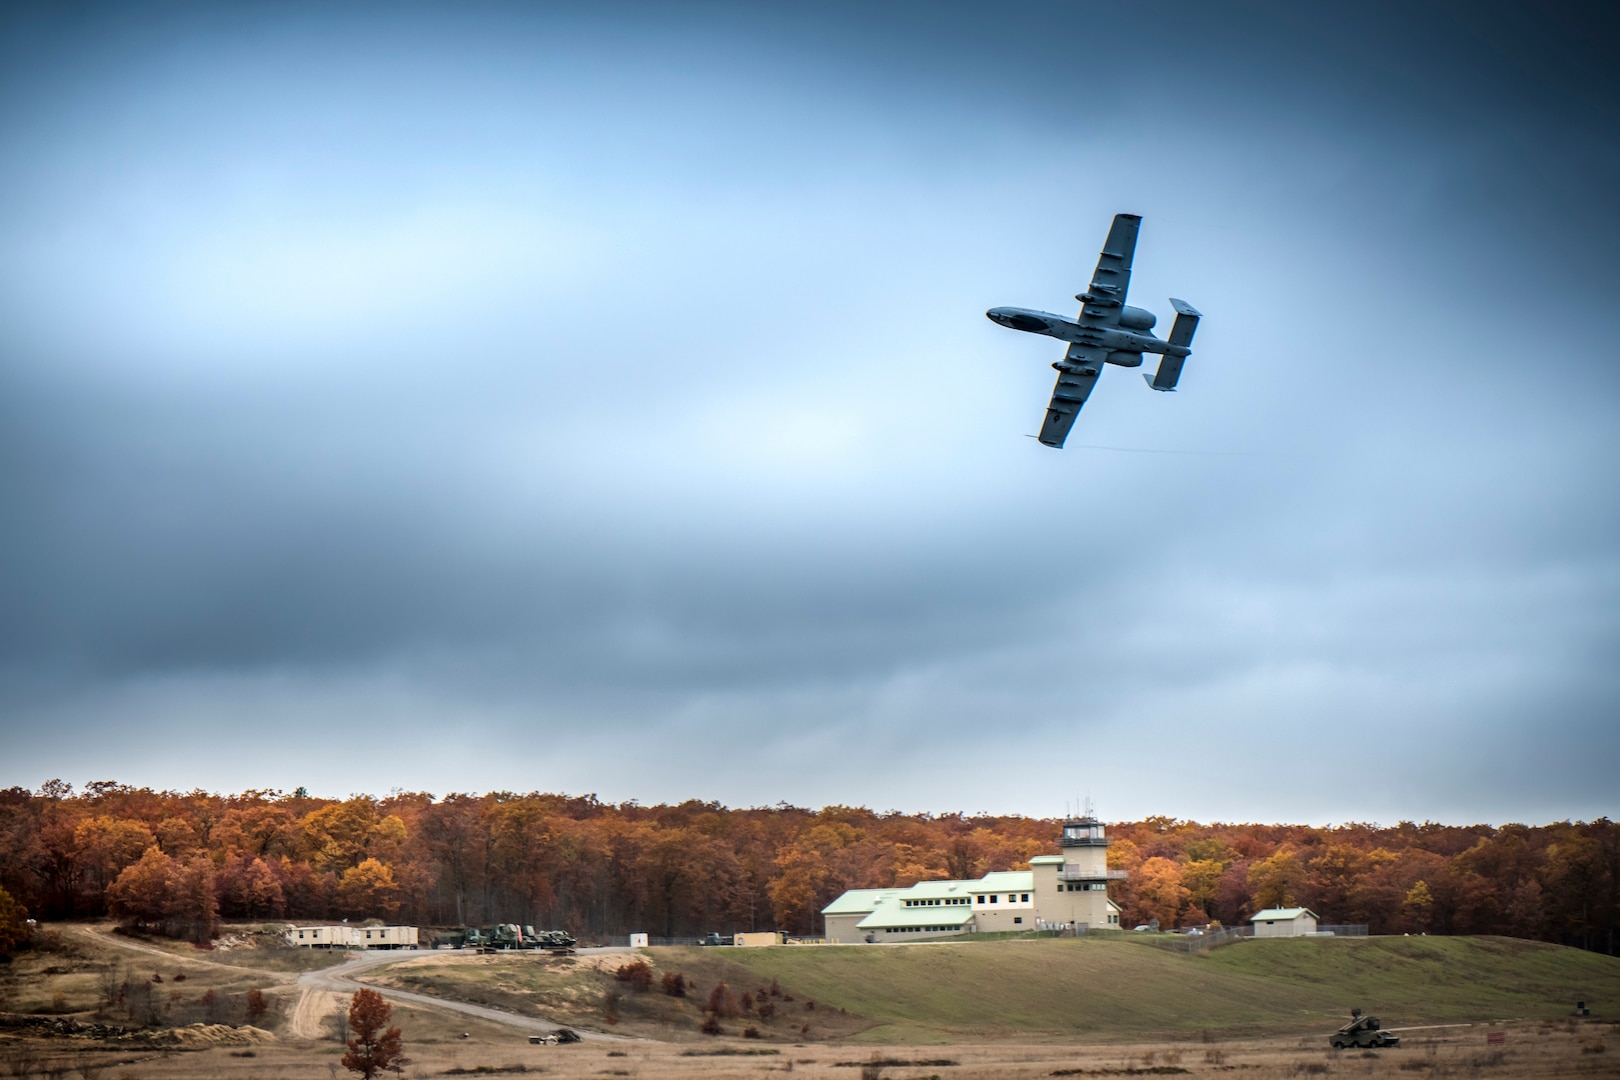 Joint Terminal Attack Controllers from the Latvian National Armed Forces conduct close air support training with A-10 Thunderbolt II aircraft assigned to the 107th Fighter Squadron, Selfridge Air National Guard Base, Mich., at Grayling Aerial Gunnery Range in Waters, Mich., October 29, 2019.